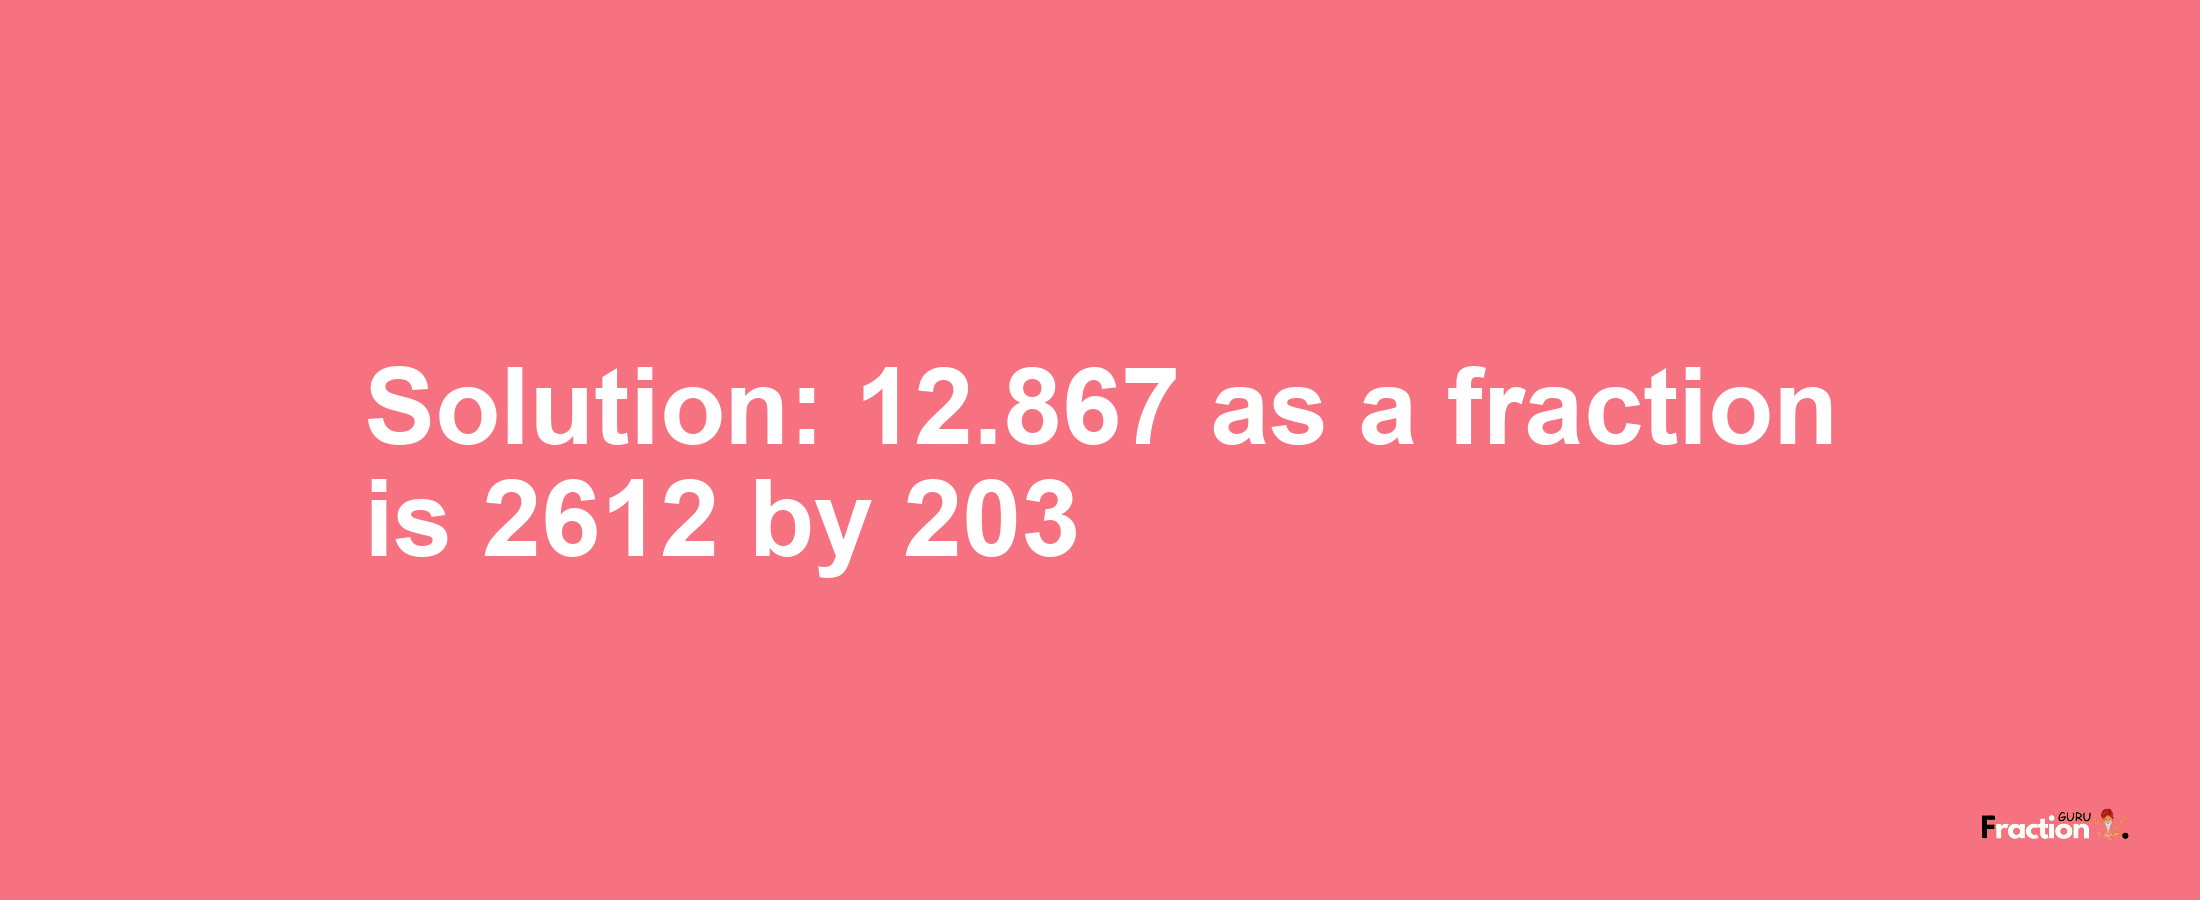 Solution:12.867 as a fraction is 2612/203